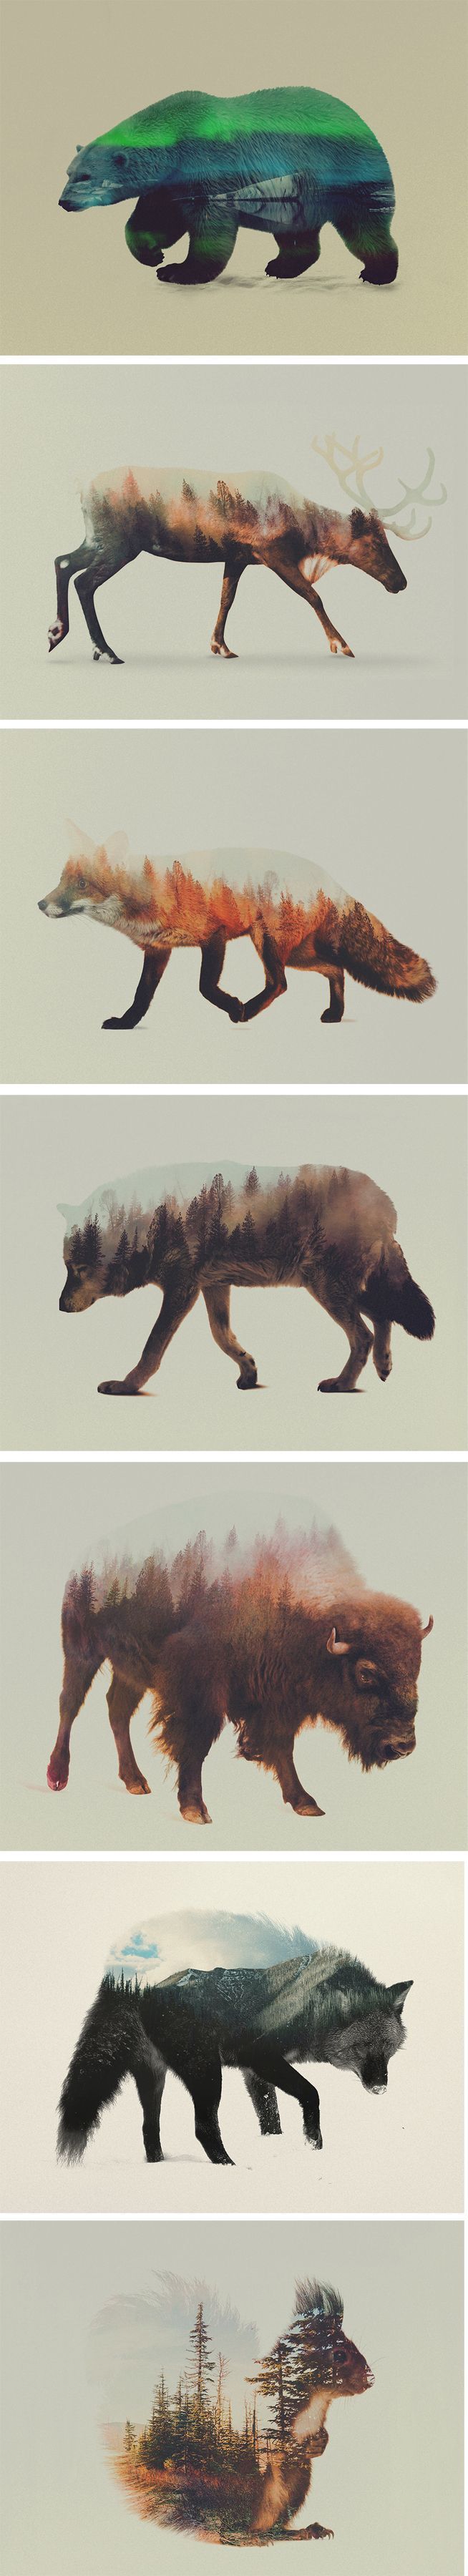 Norwegian visual artist Andreas Lie merges verdant landscapes and photographs of animals to creates subtle double exposure